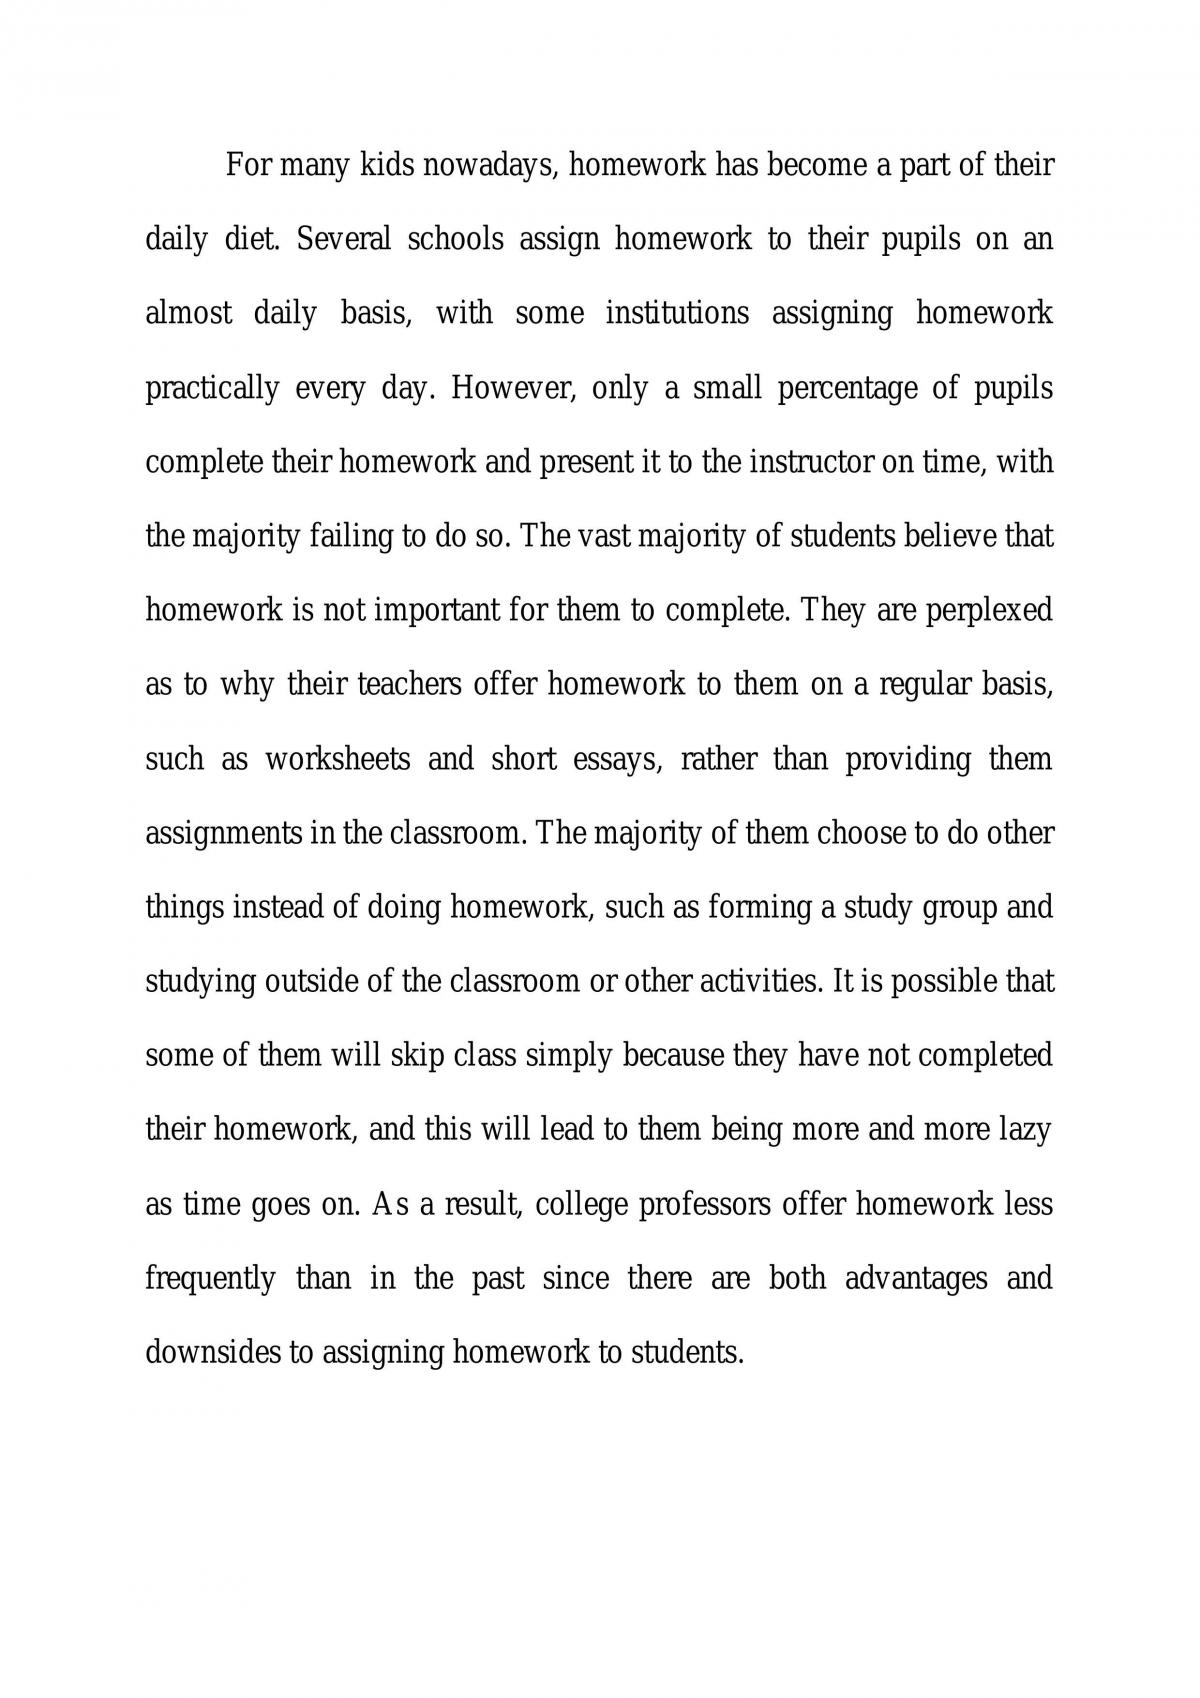 essay about advantages and disadvantages of homework